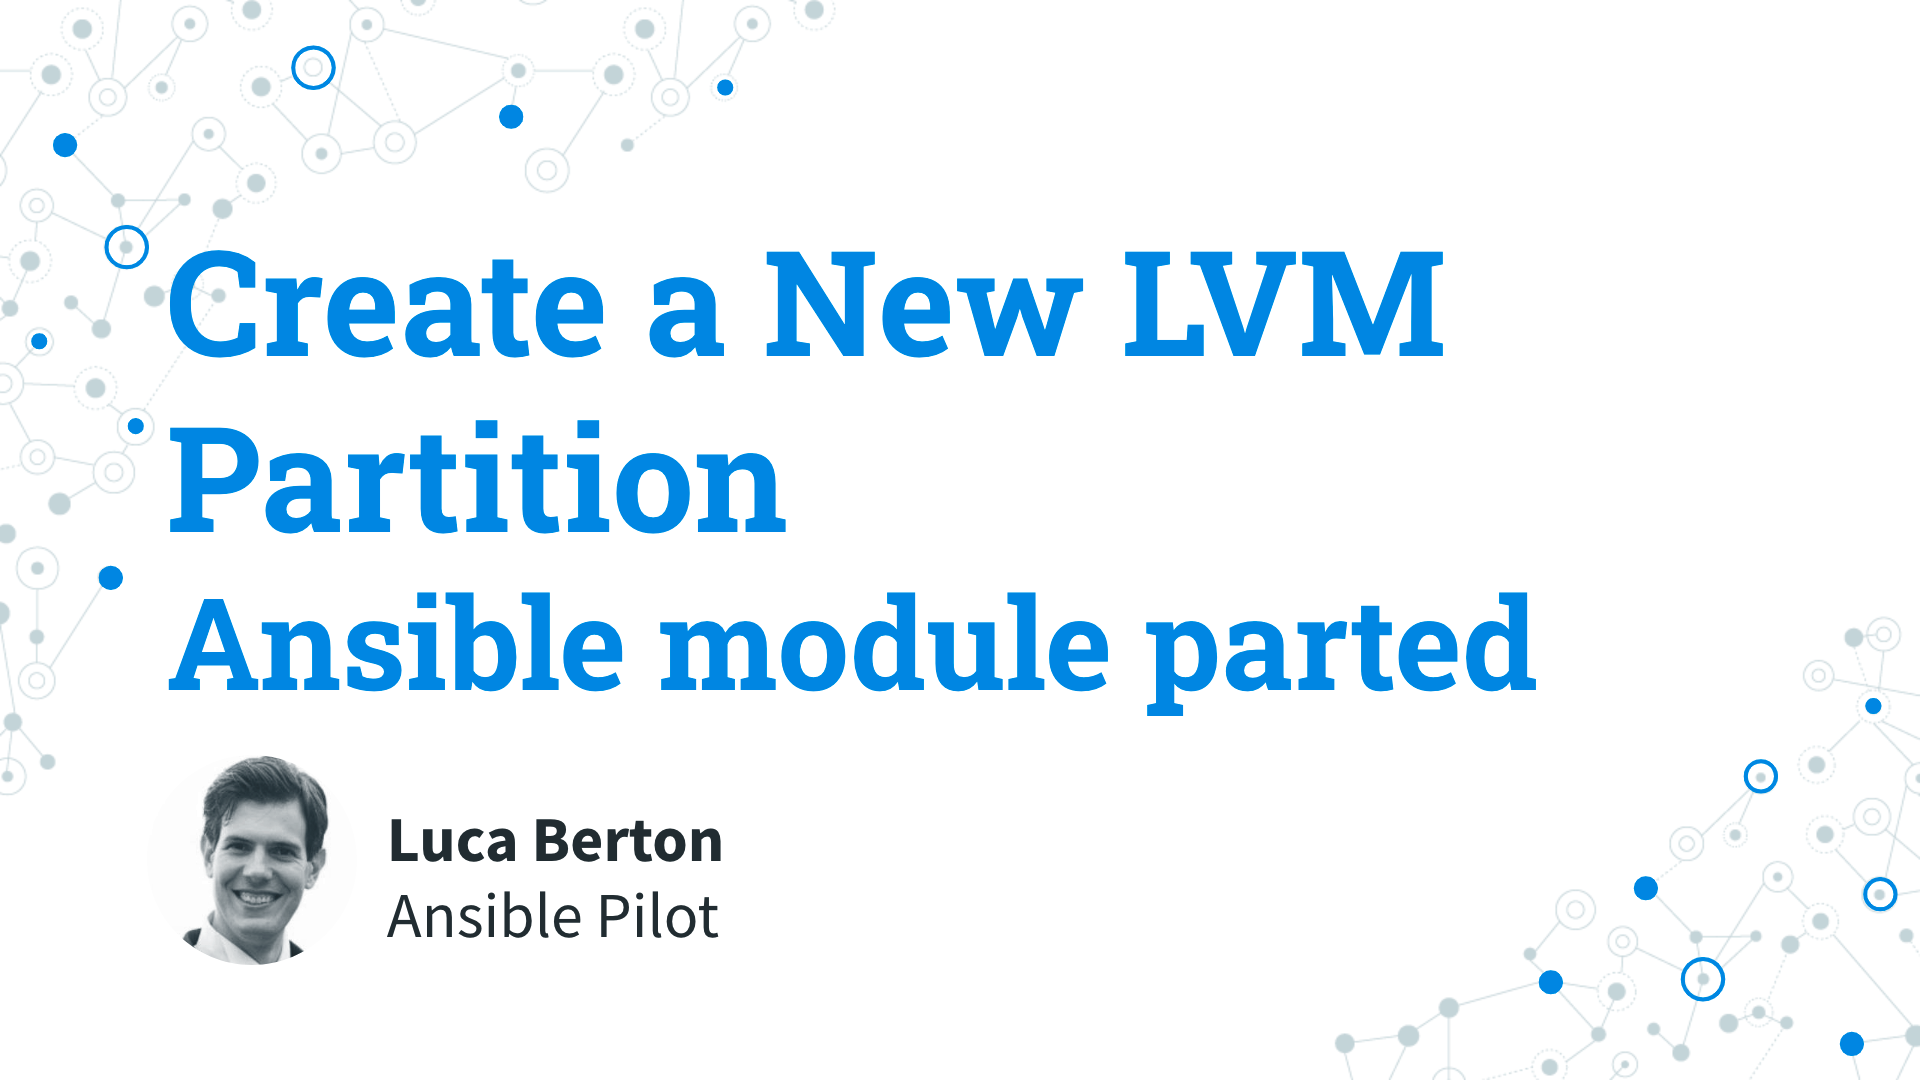 Create a New LVM Partition - Ansible module parted